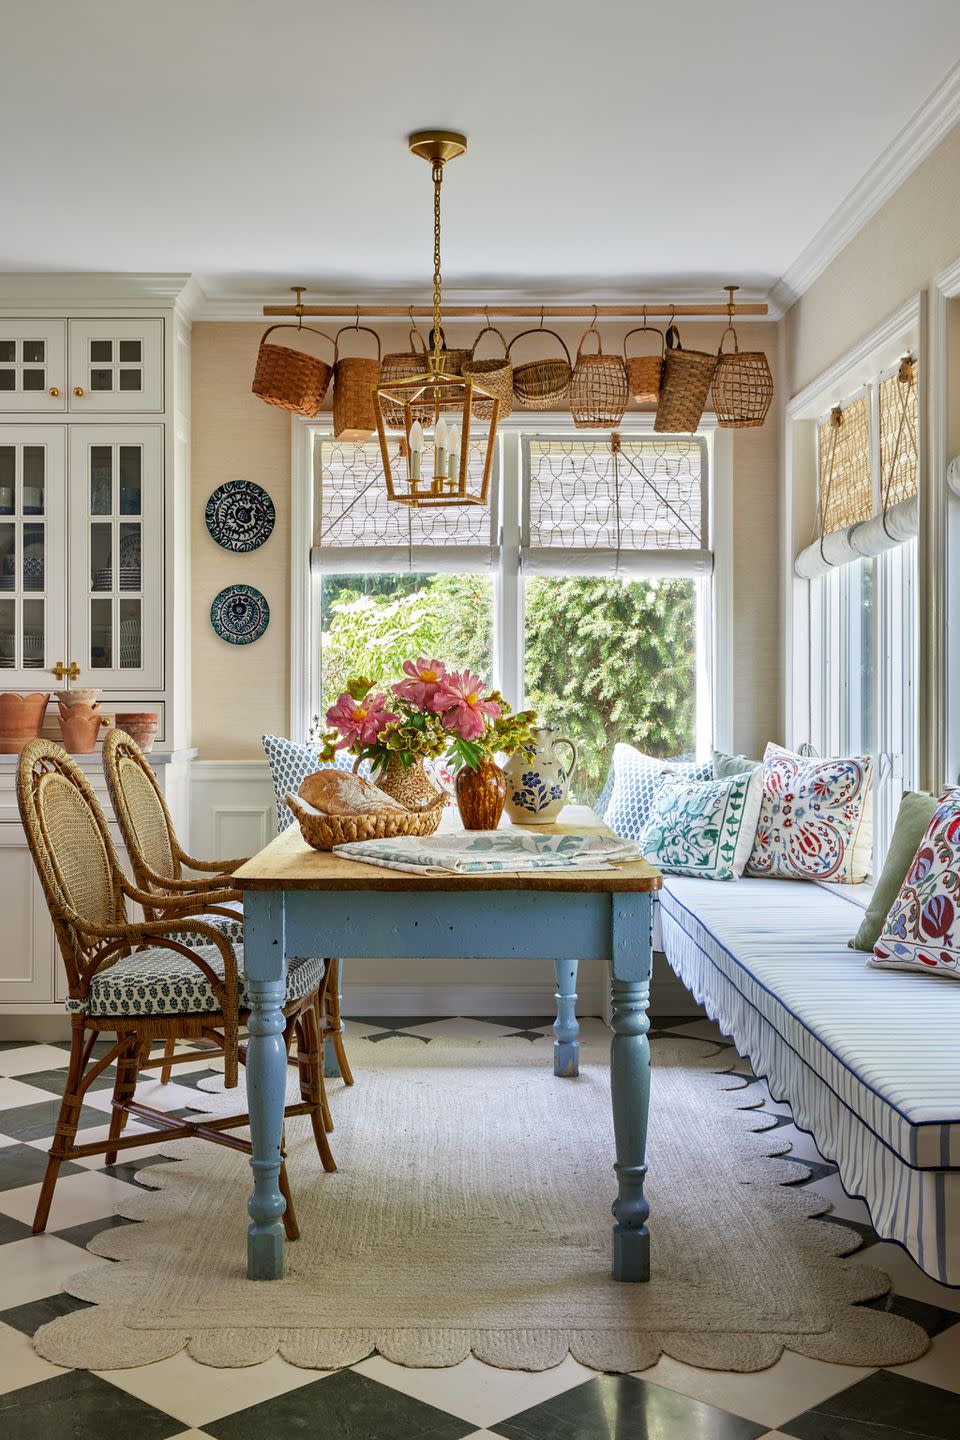 window nook in kitchen of country home with baskets hanging from the ceiling